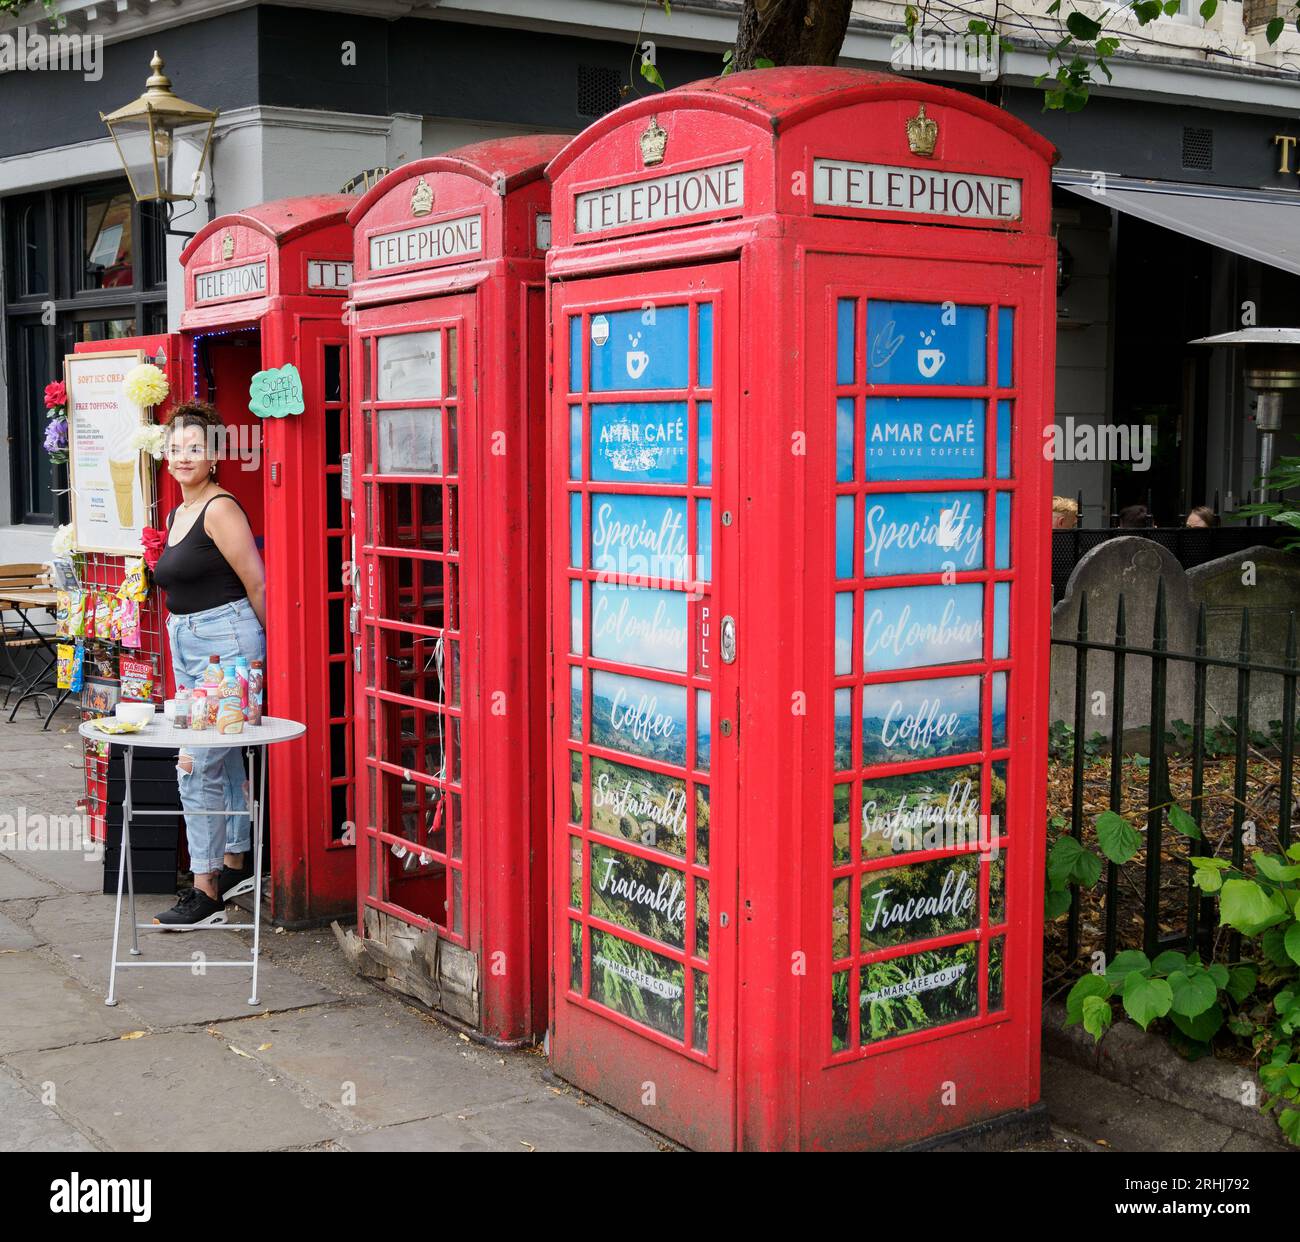 Entrepreneur with a pop-up cafe and ice cream shop in a K7 telephone kiosk in Greenwich London UK Stock Photo